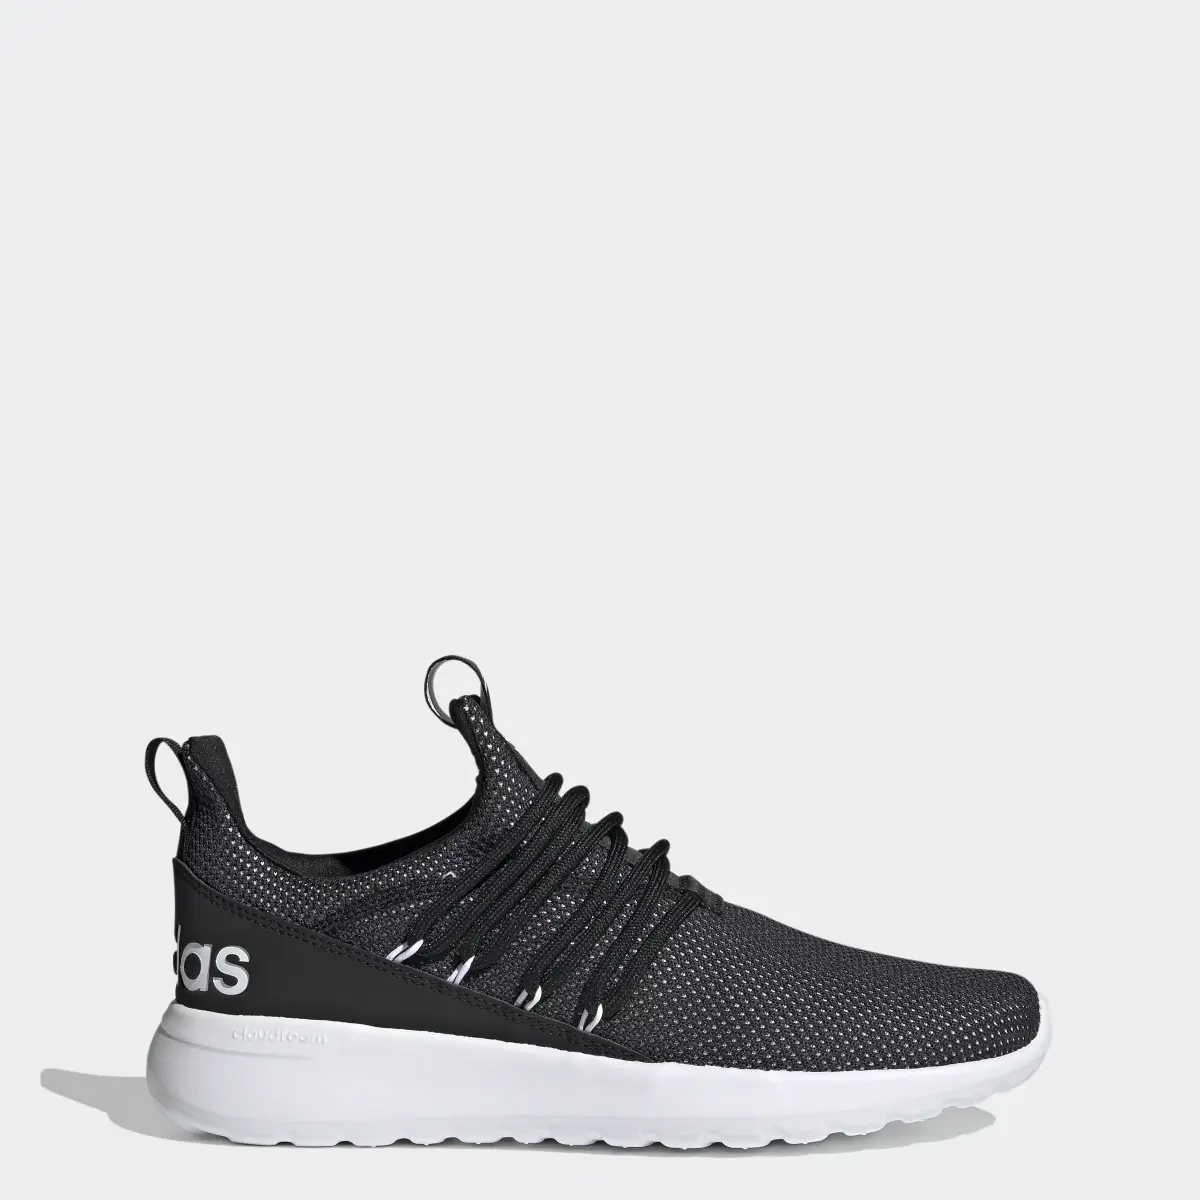 Adidas Lite Racer Adapt 3 Shoes. 1